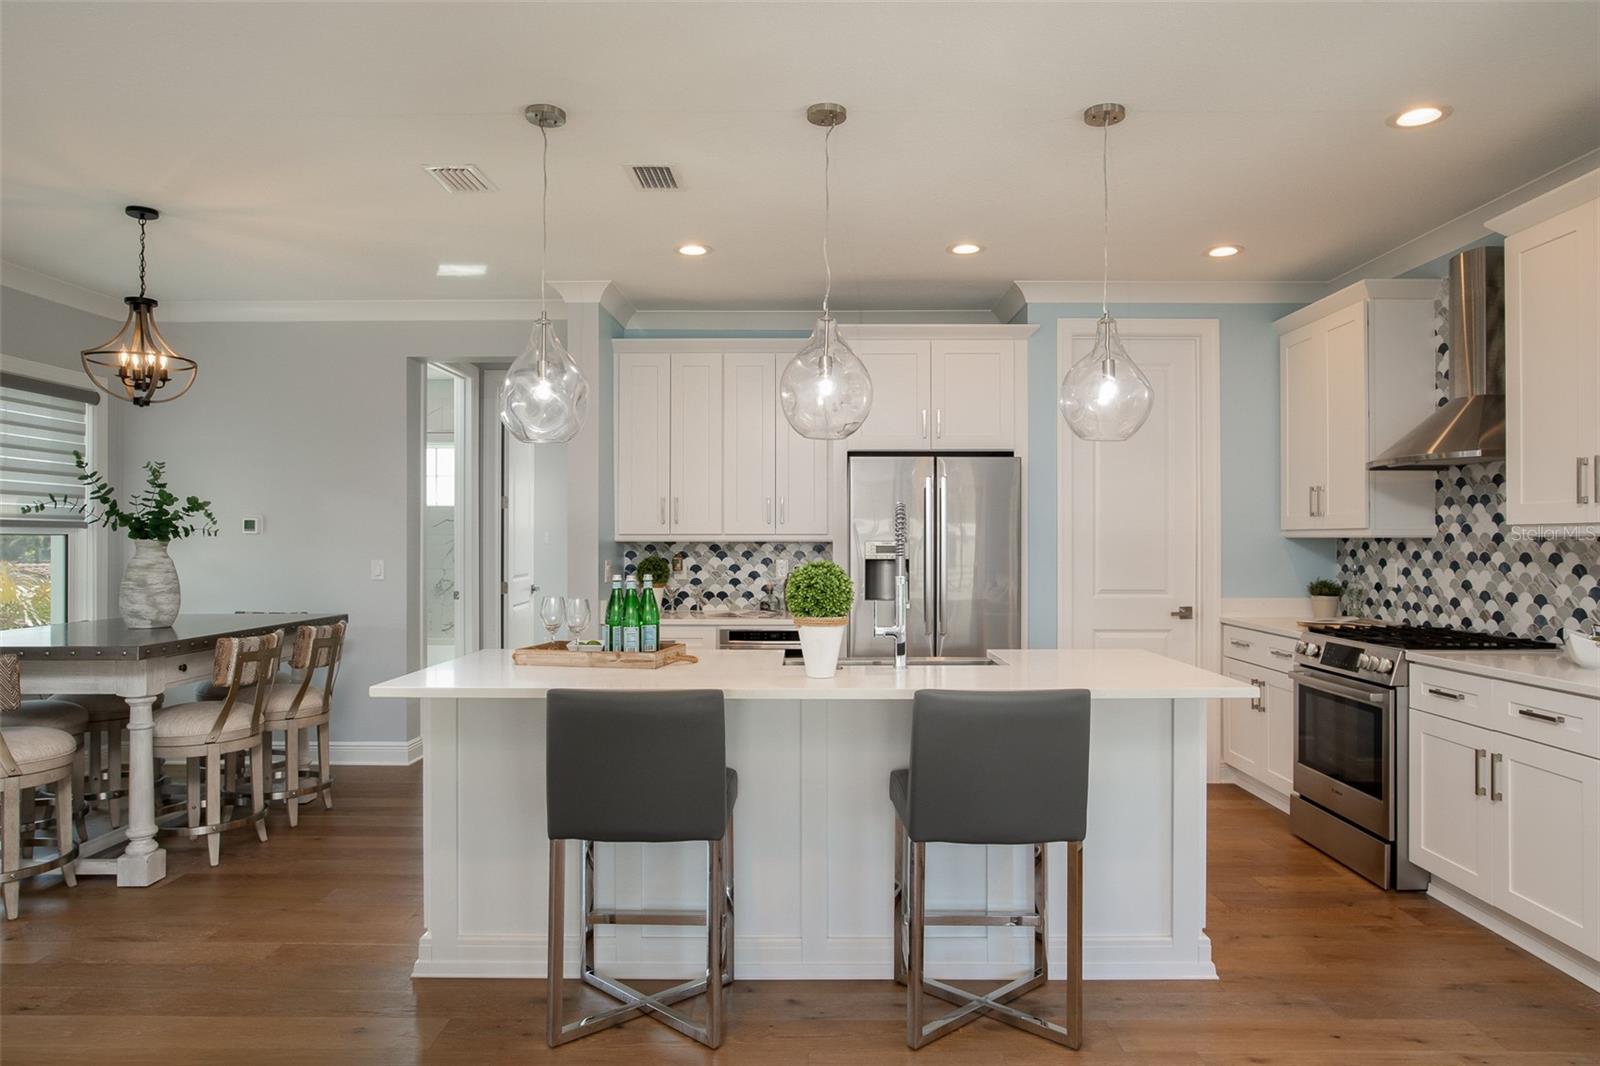 Adjacent to the island, the eating space offers a cozy yet stylish spot to enjoy casual meals or engage in lively conversations, seamlessly blending convenience with coastal elegance in your new home.